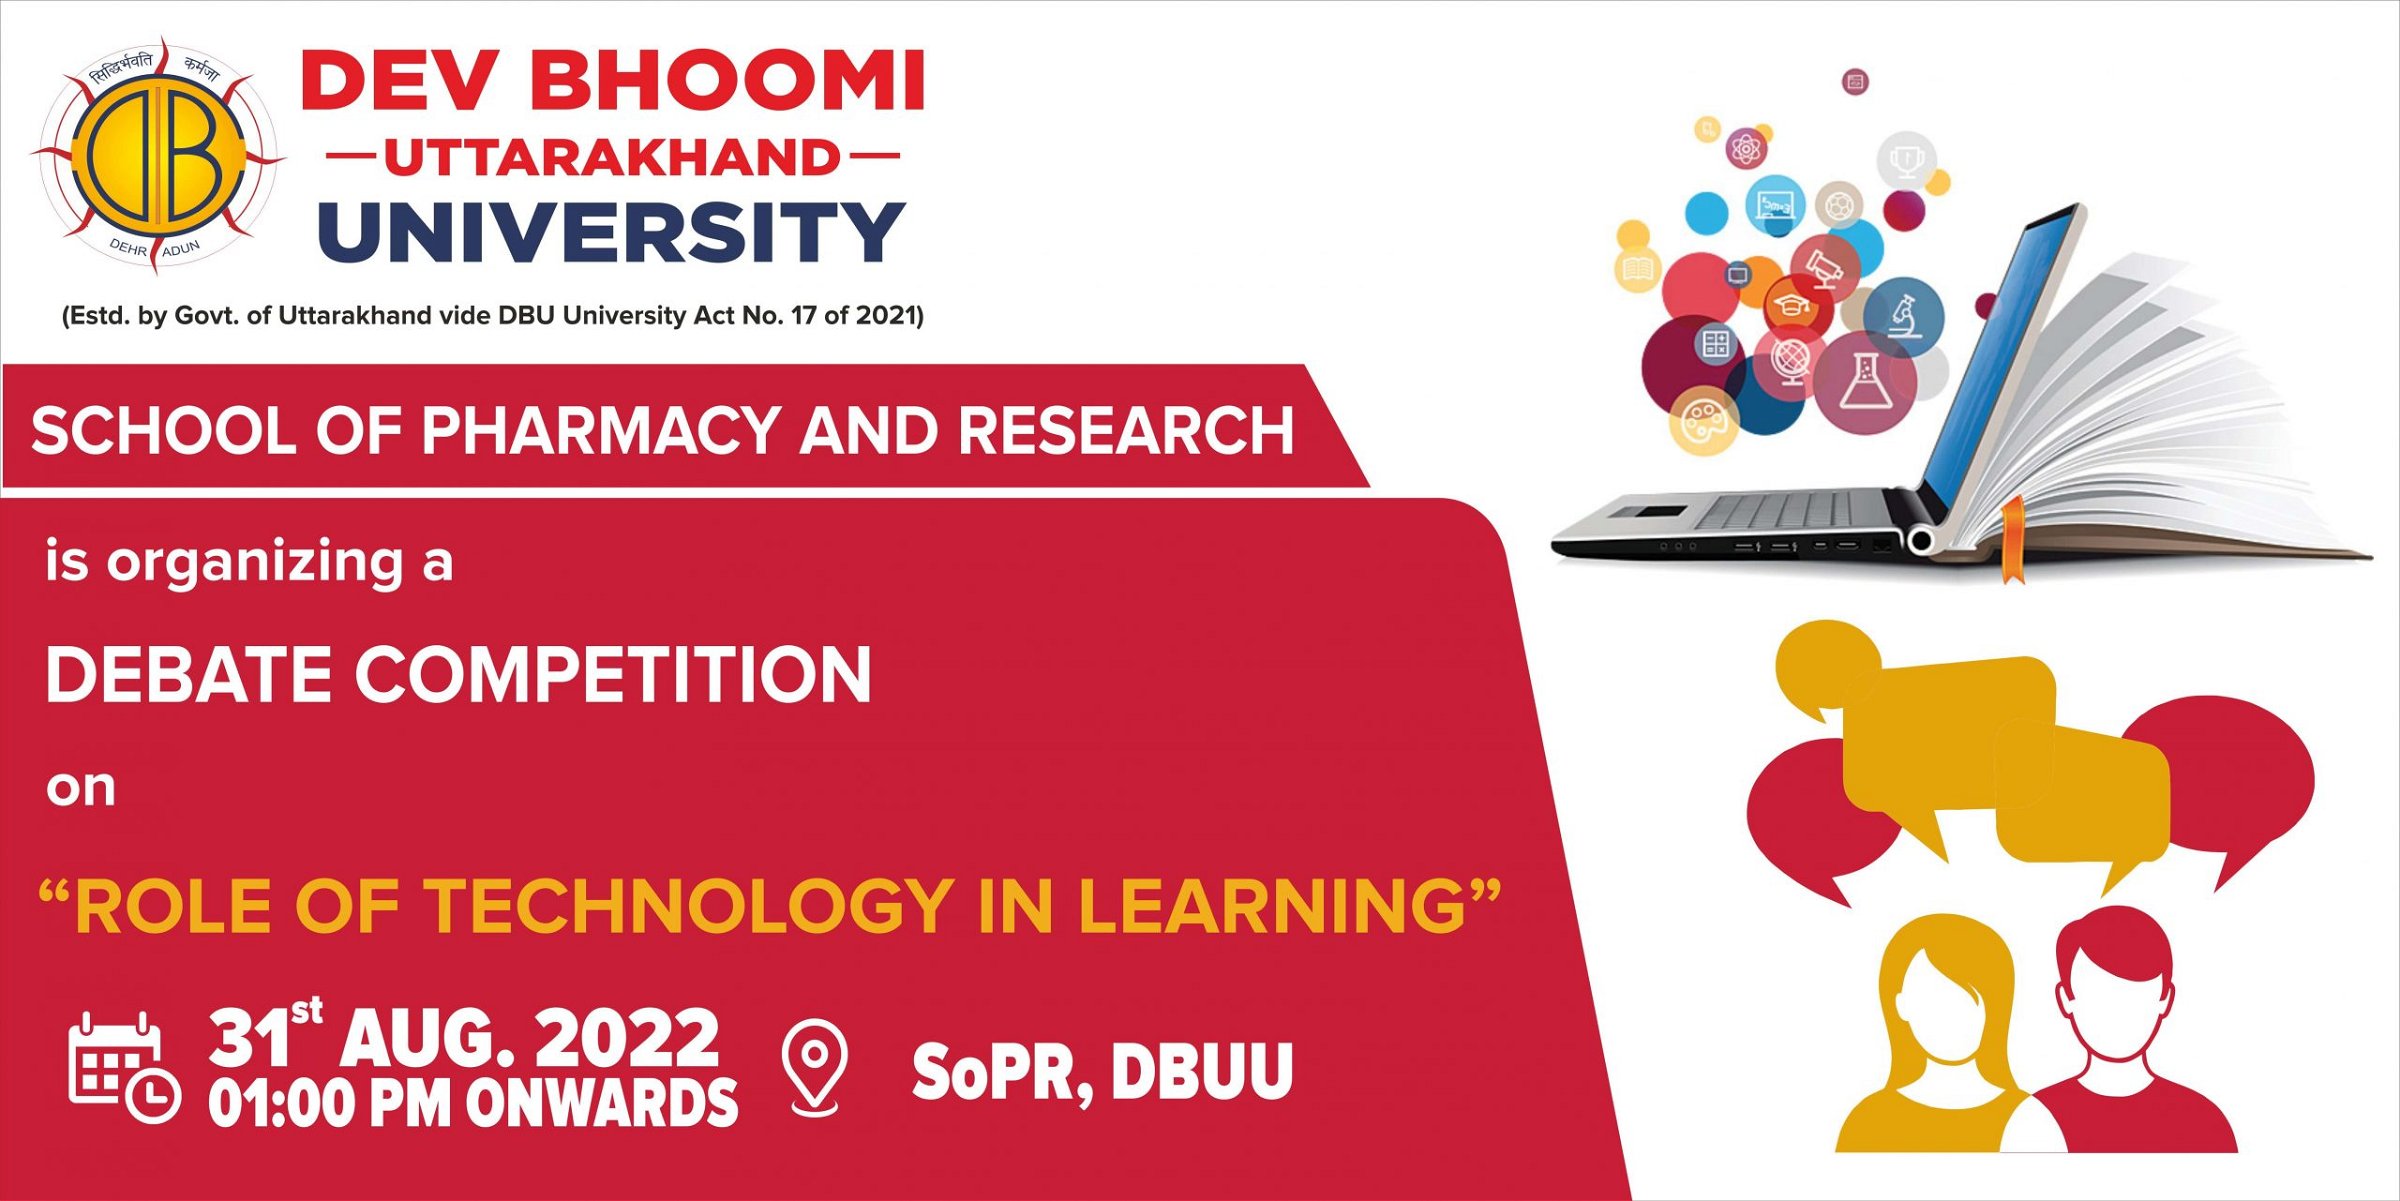 Debate Competition on “Role of Technology in learning”